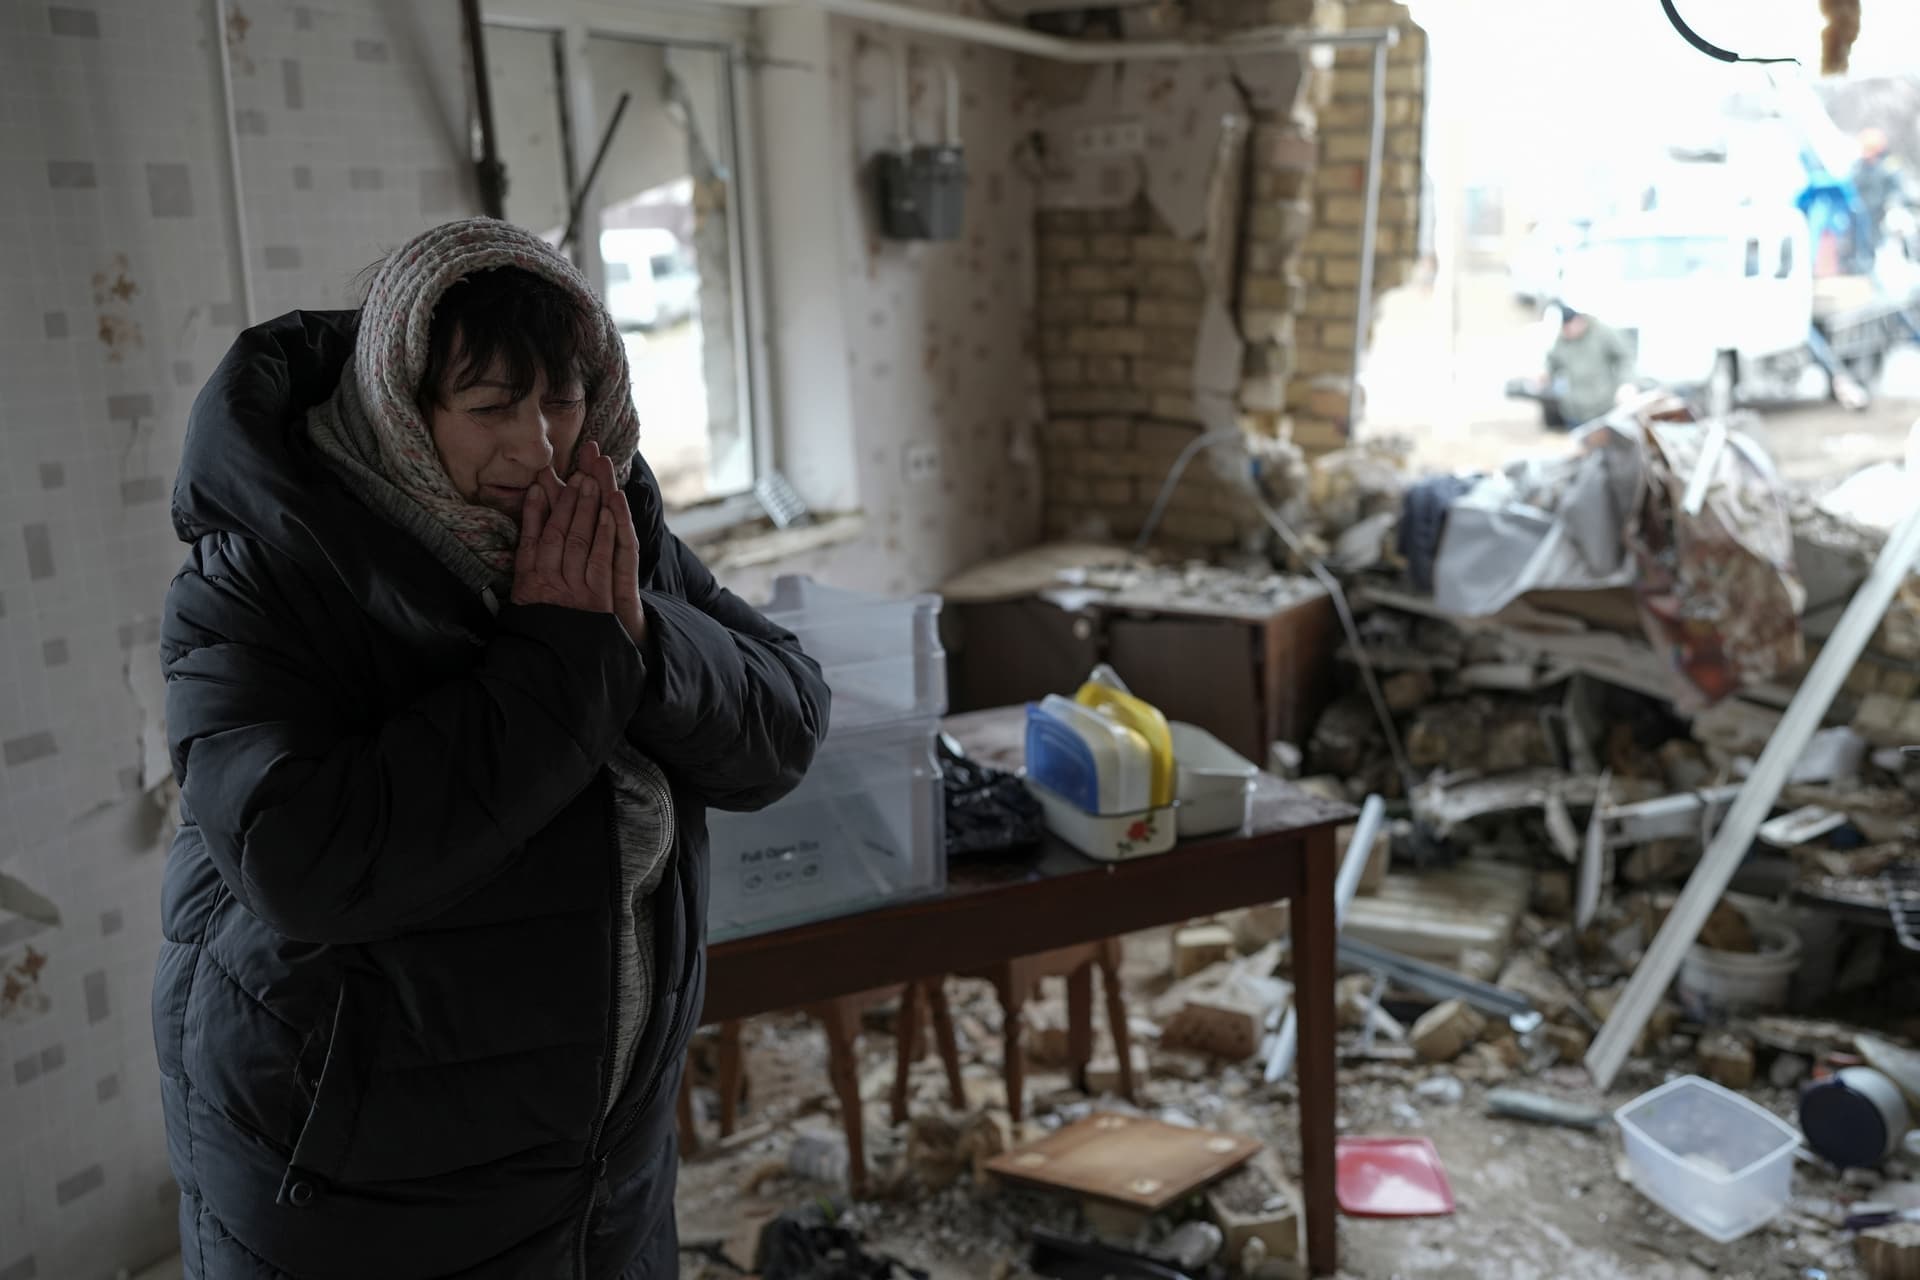 Halina Panasian, 69, reacts inside her destroyed house after a Russian rocket attack in Hlevakha